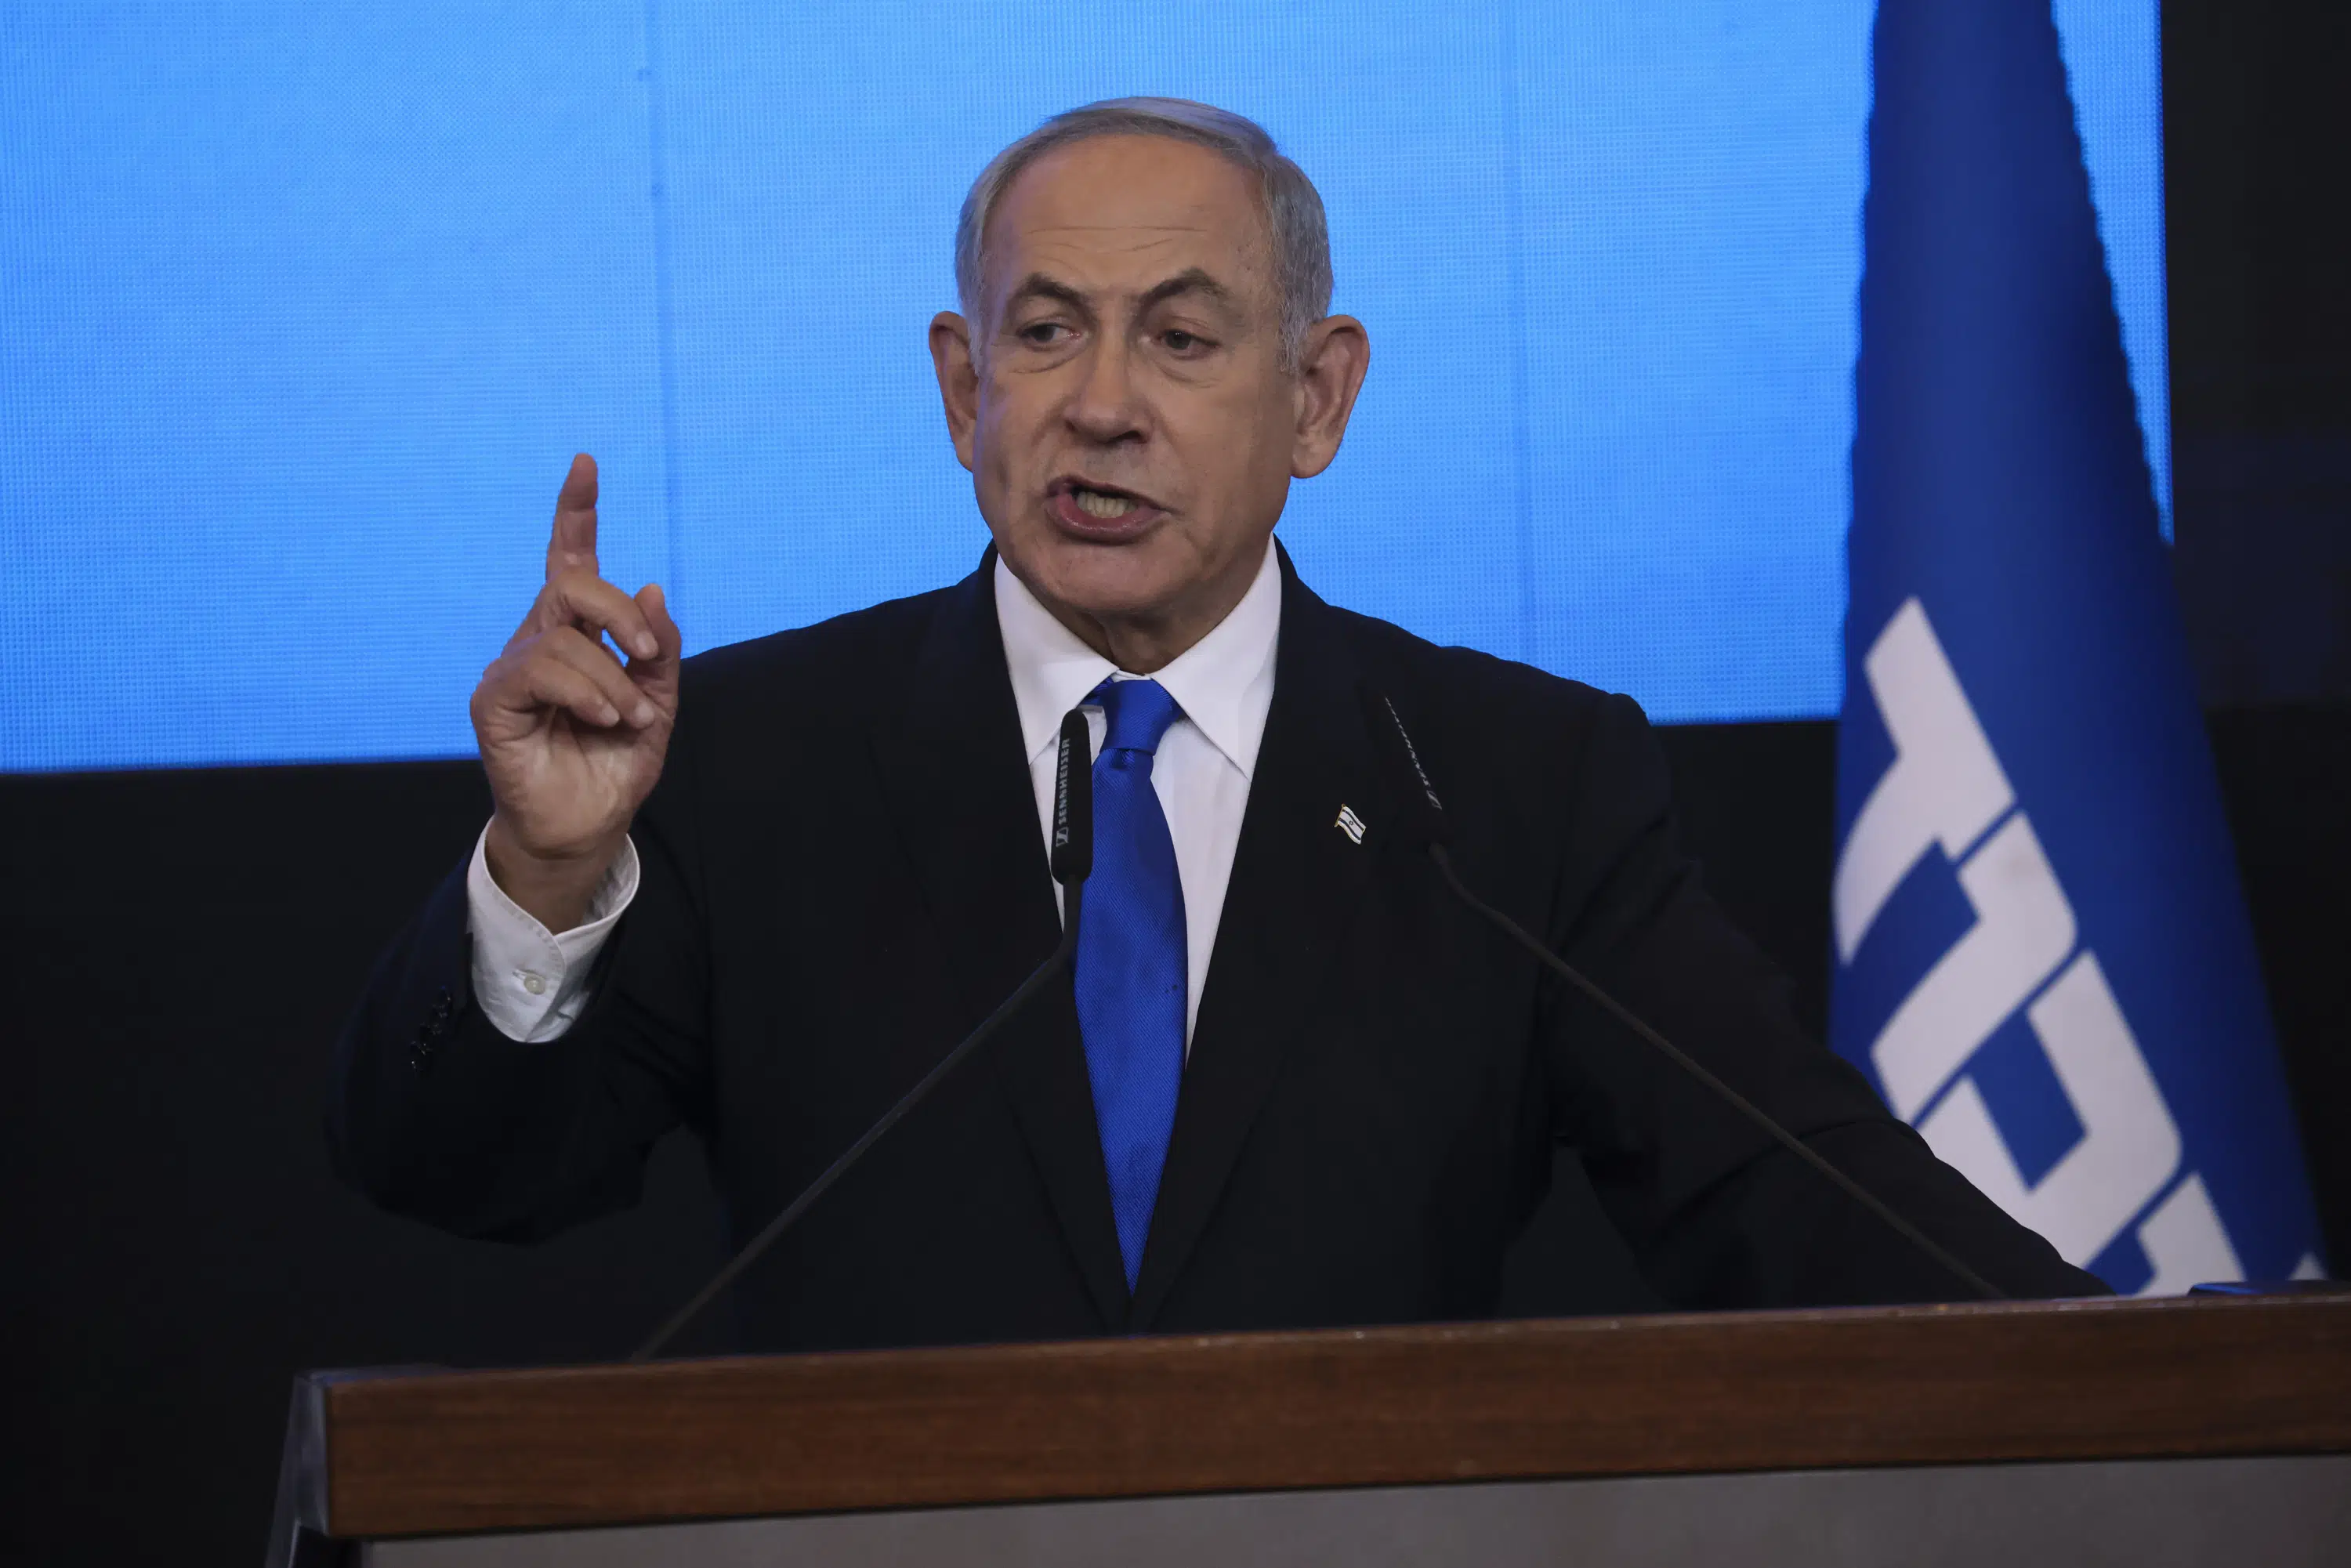 Israel's Netanyahu says he has formed new government